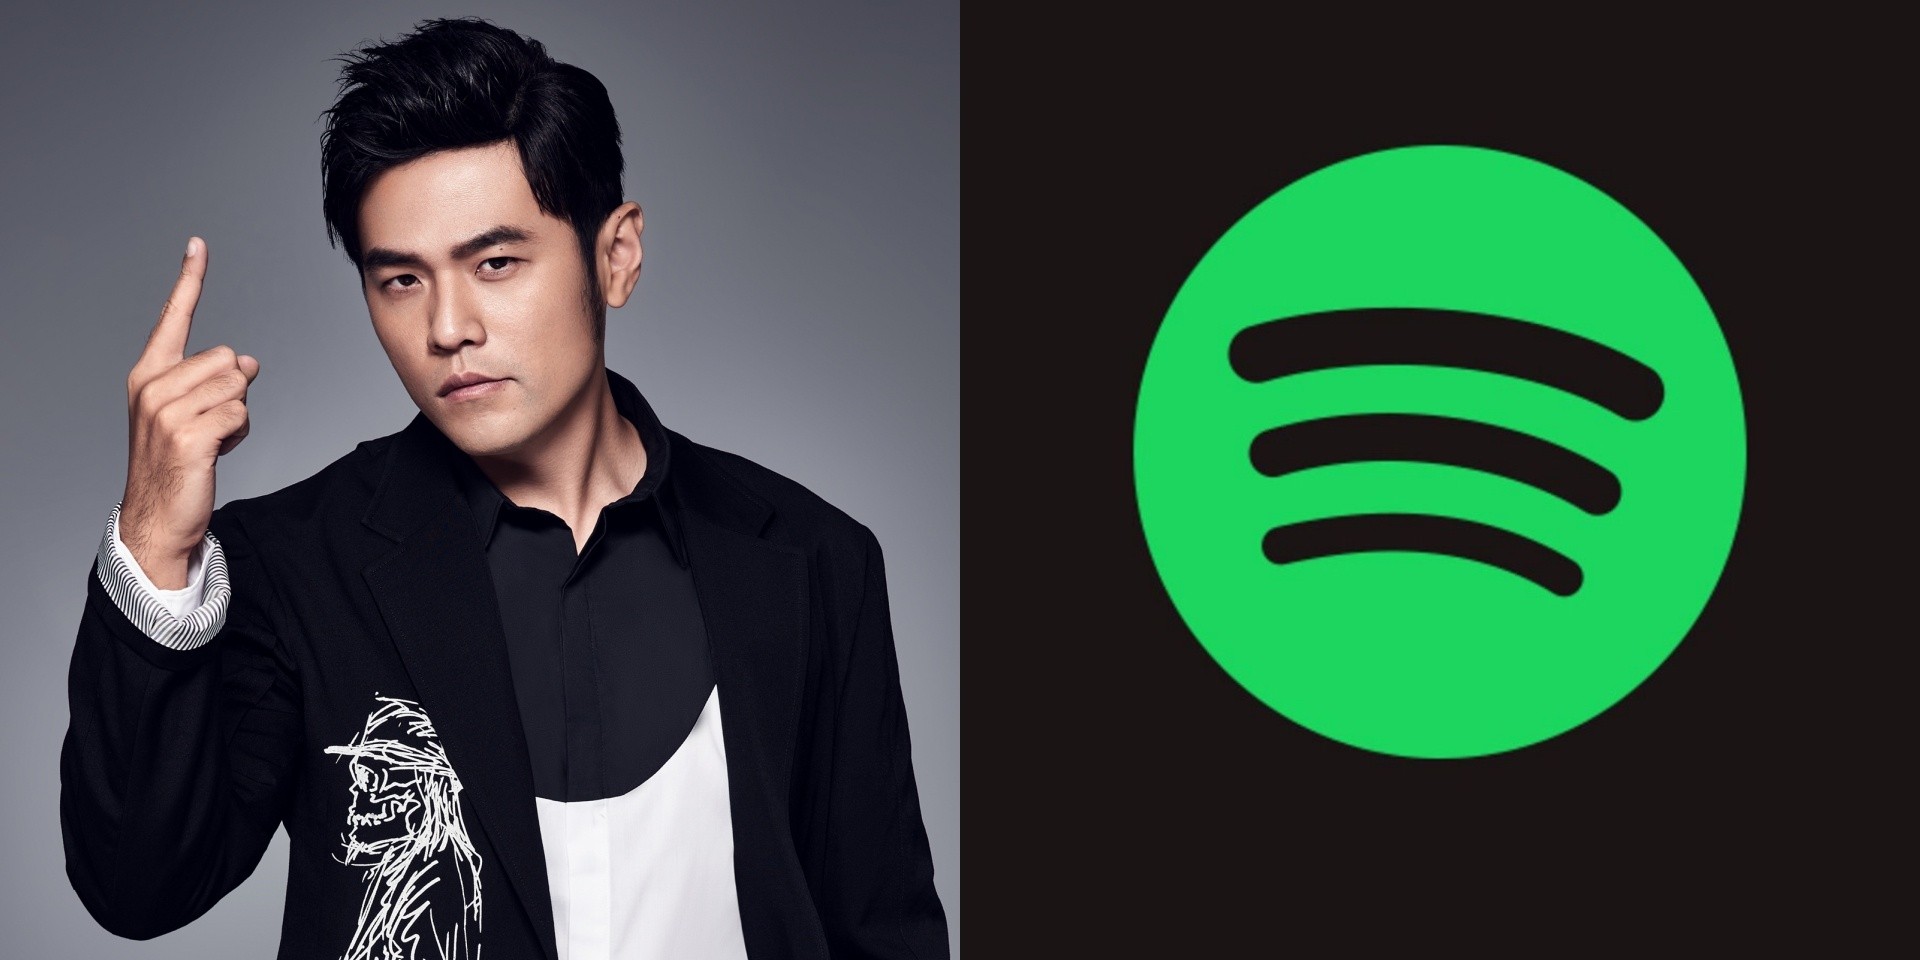 Jay Chou is most streamed artist on Spotify in Singapore